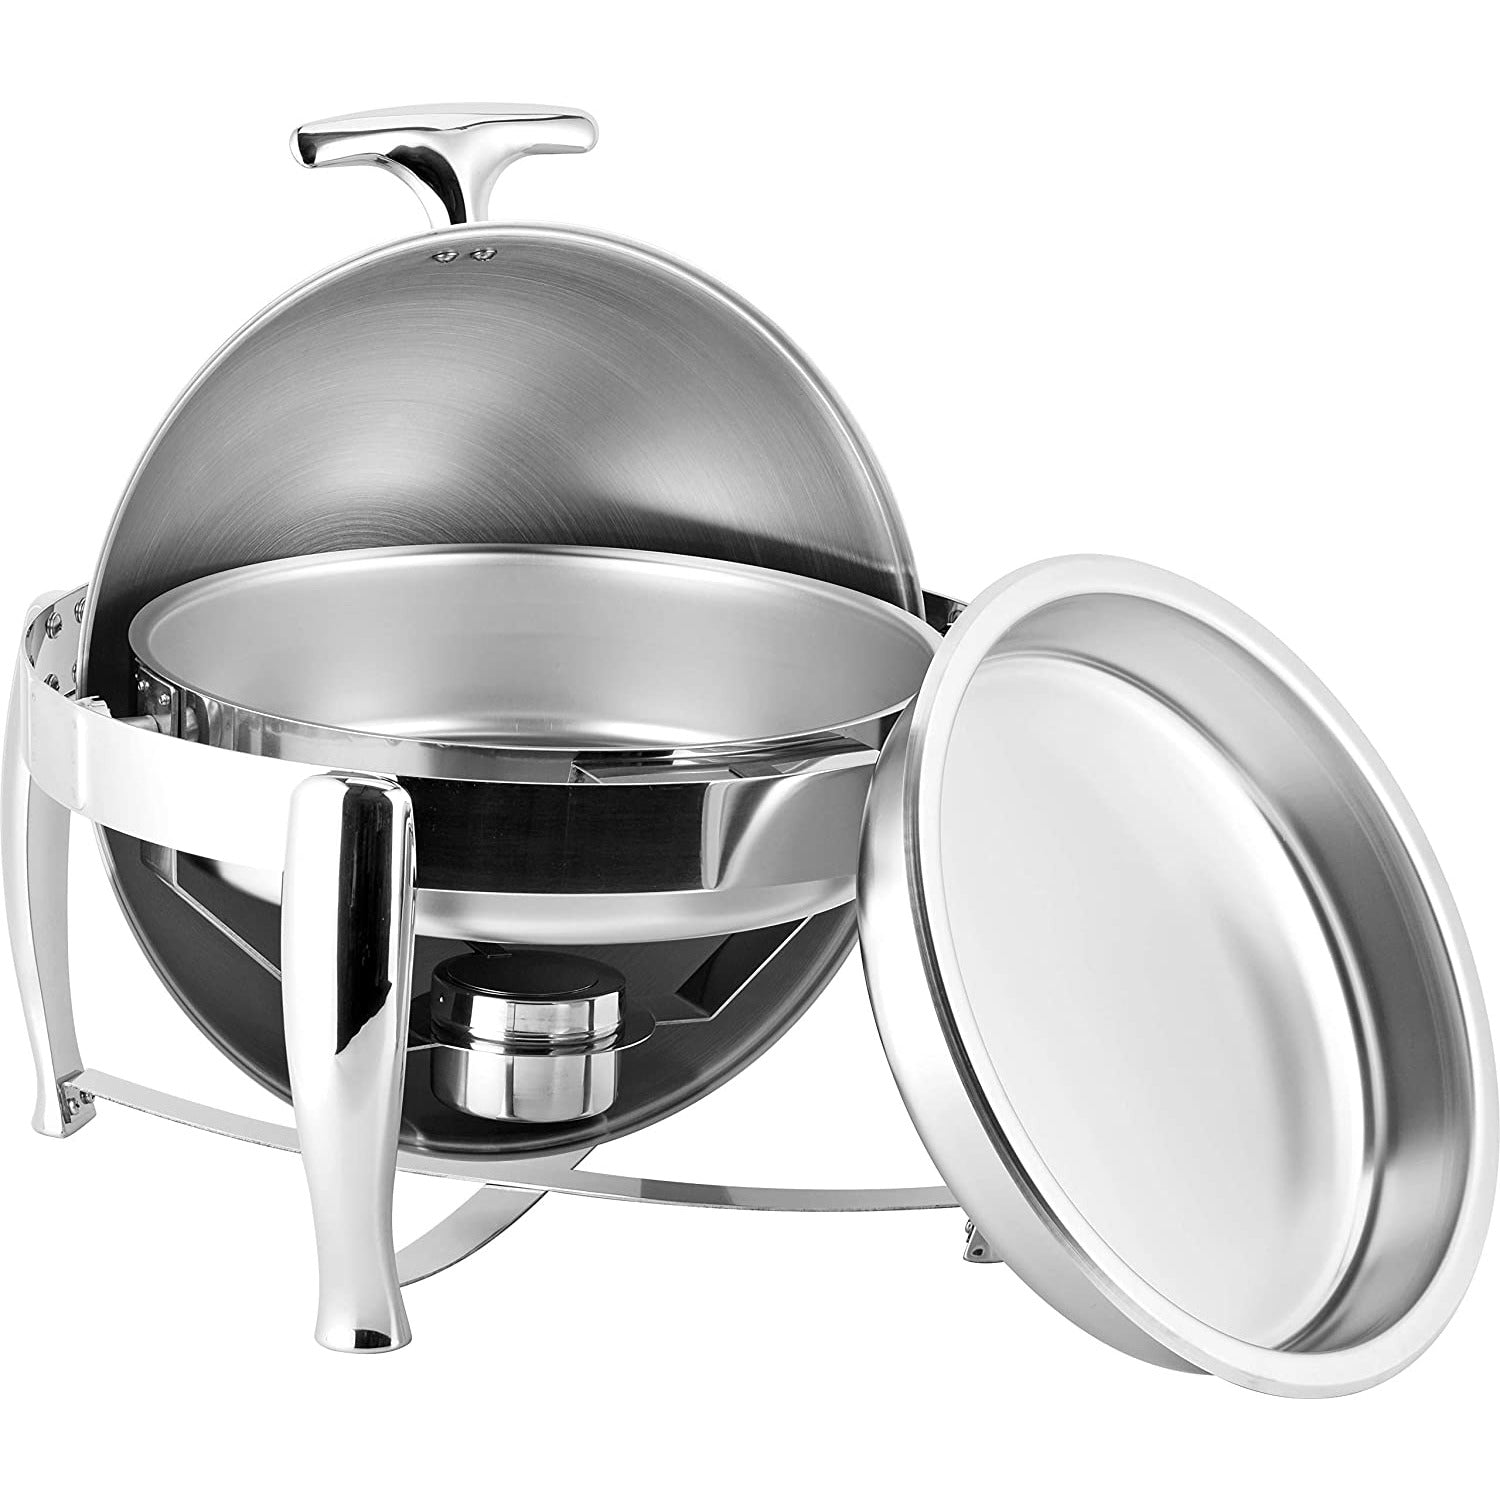 Virtuosa Deluxe High End Stainless Steel Chafer with Roll Top, 6 Quart